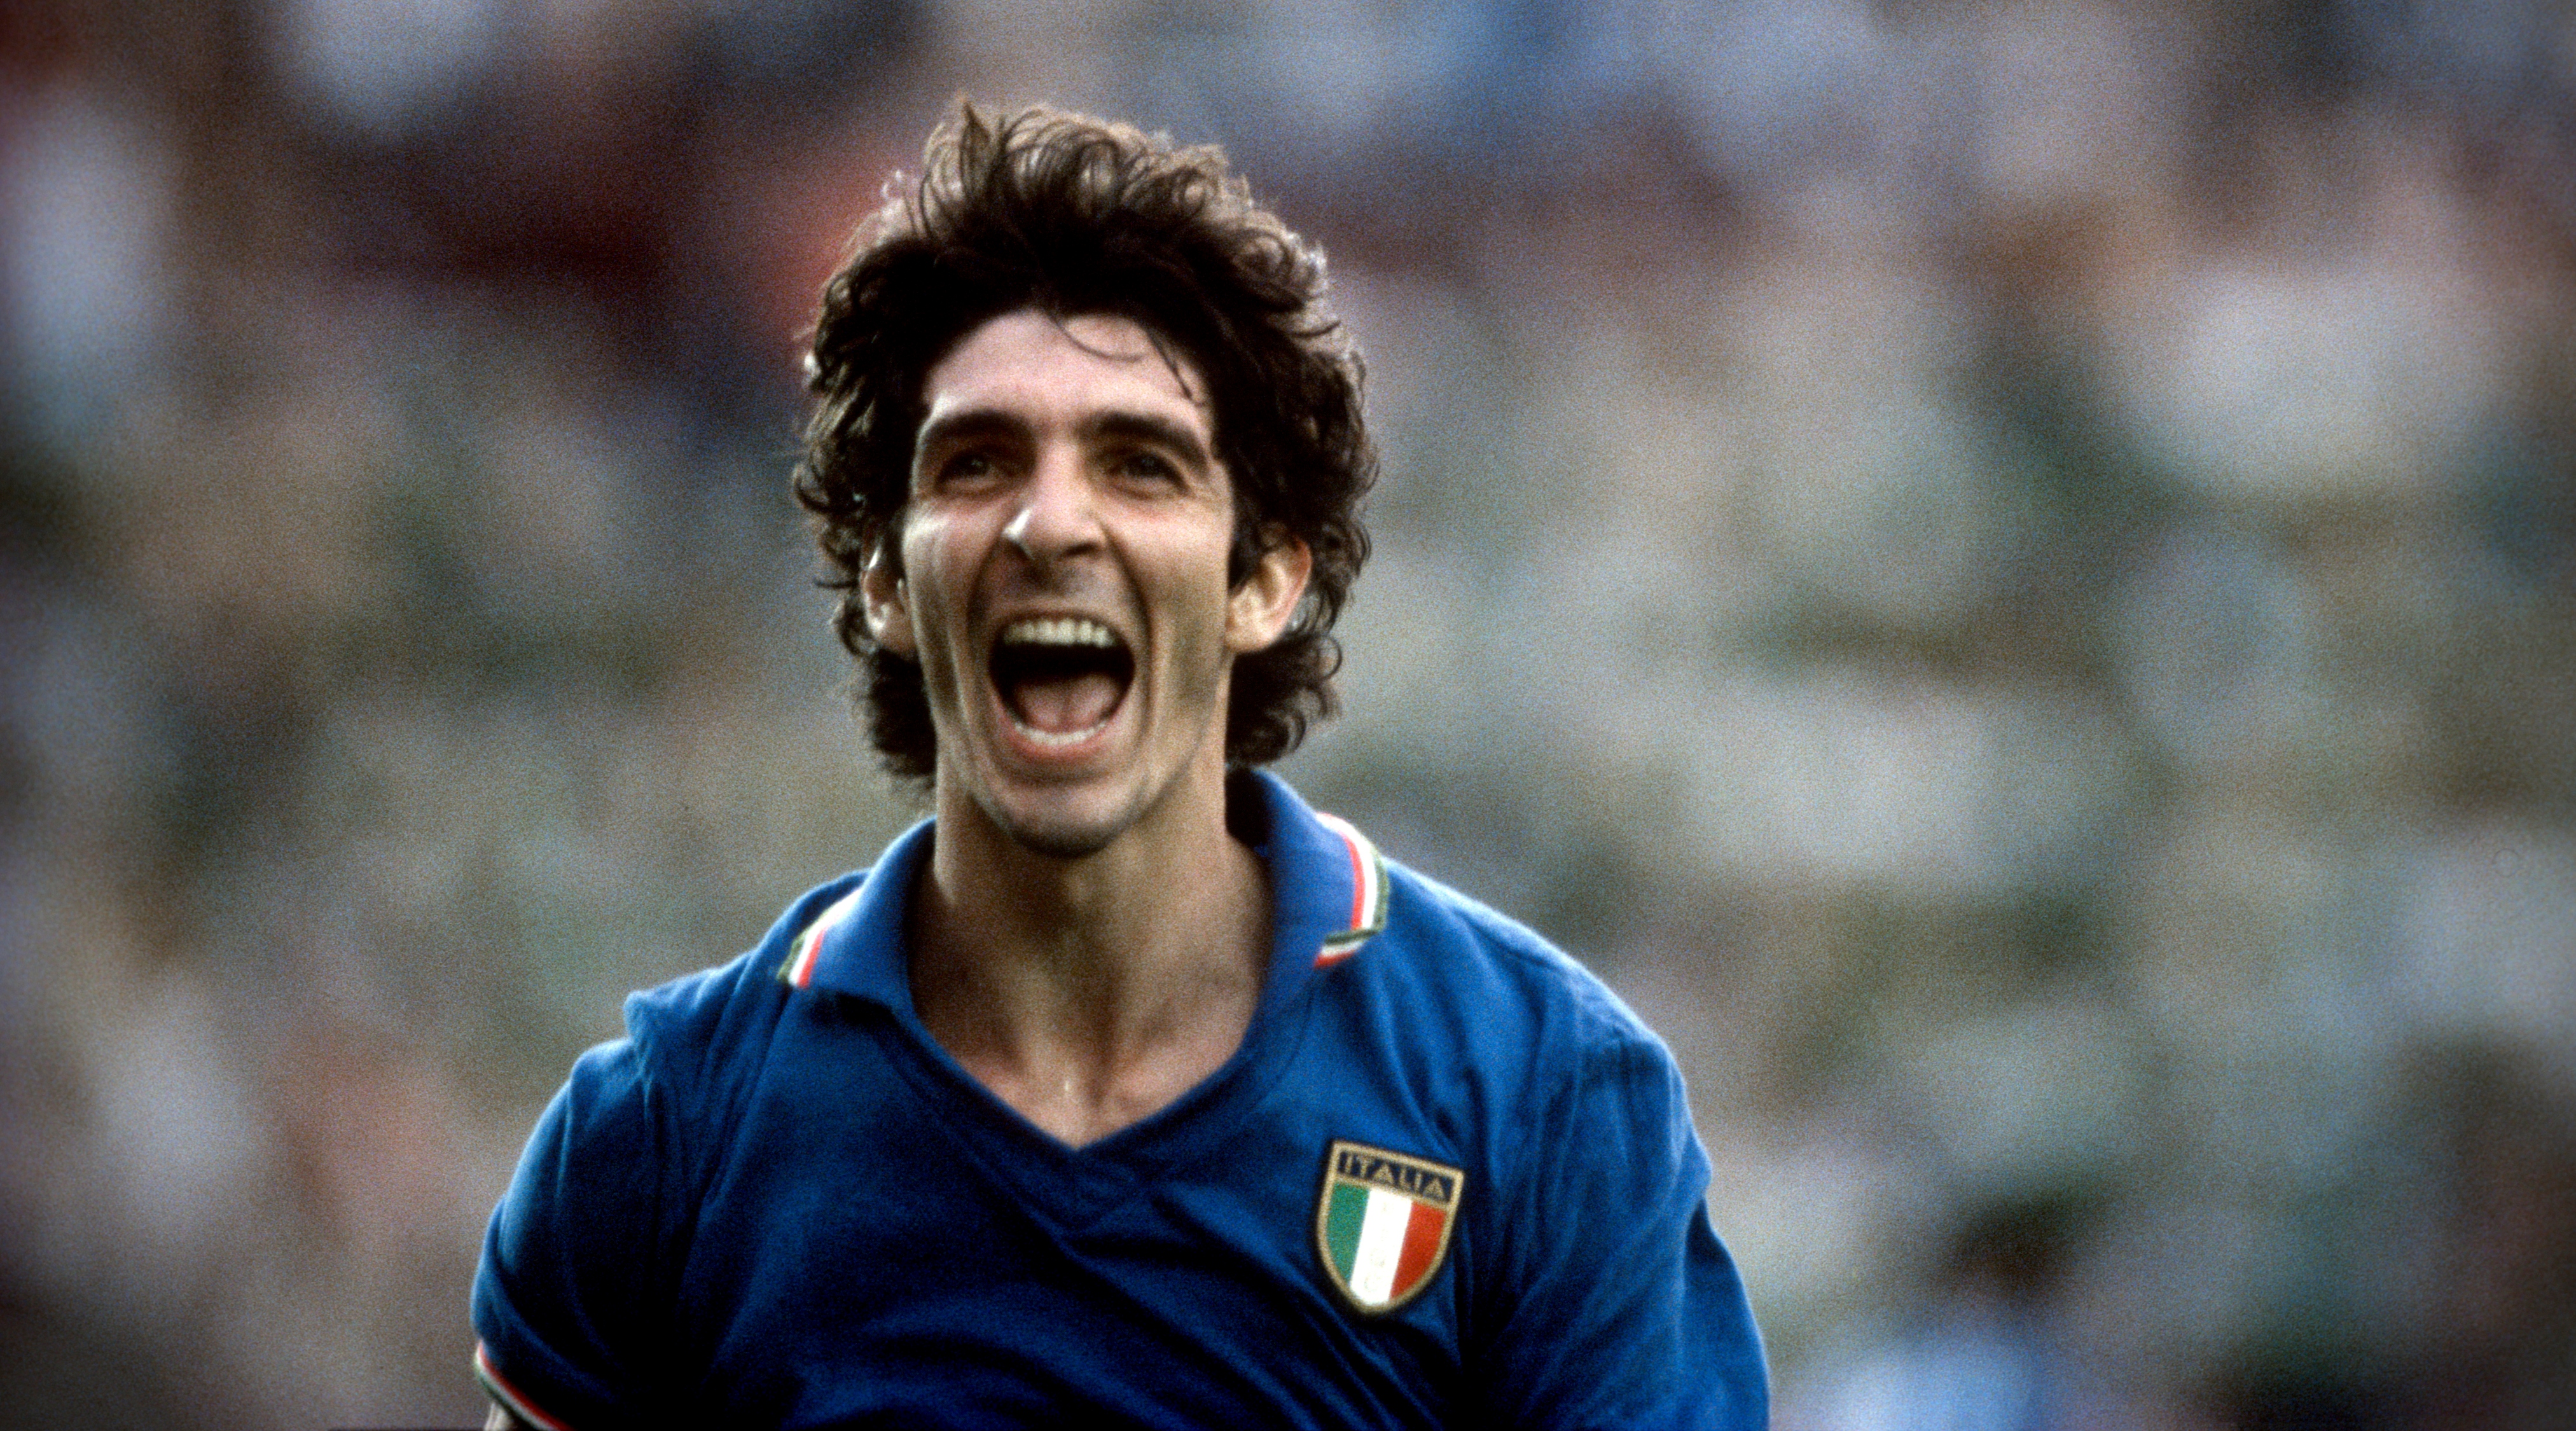 Soccer: FIFA World Cup 1982: Italy Paolo Rossi in action, victorious during Final against West Germany at Bernabeu Stadium. Madrid, Spain 7/11/1982 CREDIT: George Tidemann (Photo by George Tiedemann/Sports Illustrated via Getty Images) (SetNumber: X27034 T12 R1 F24)